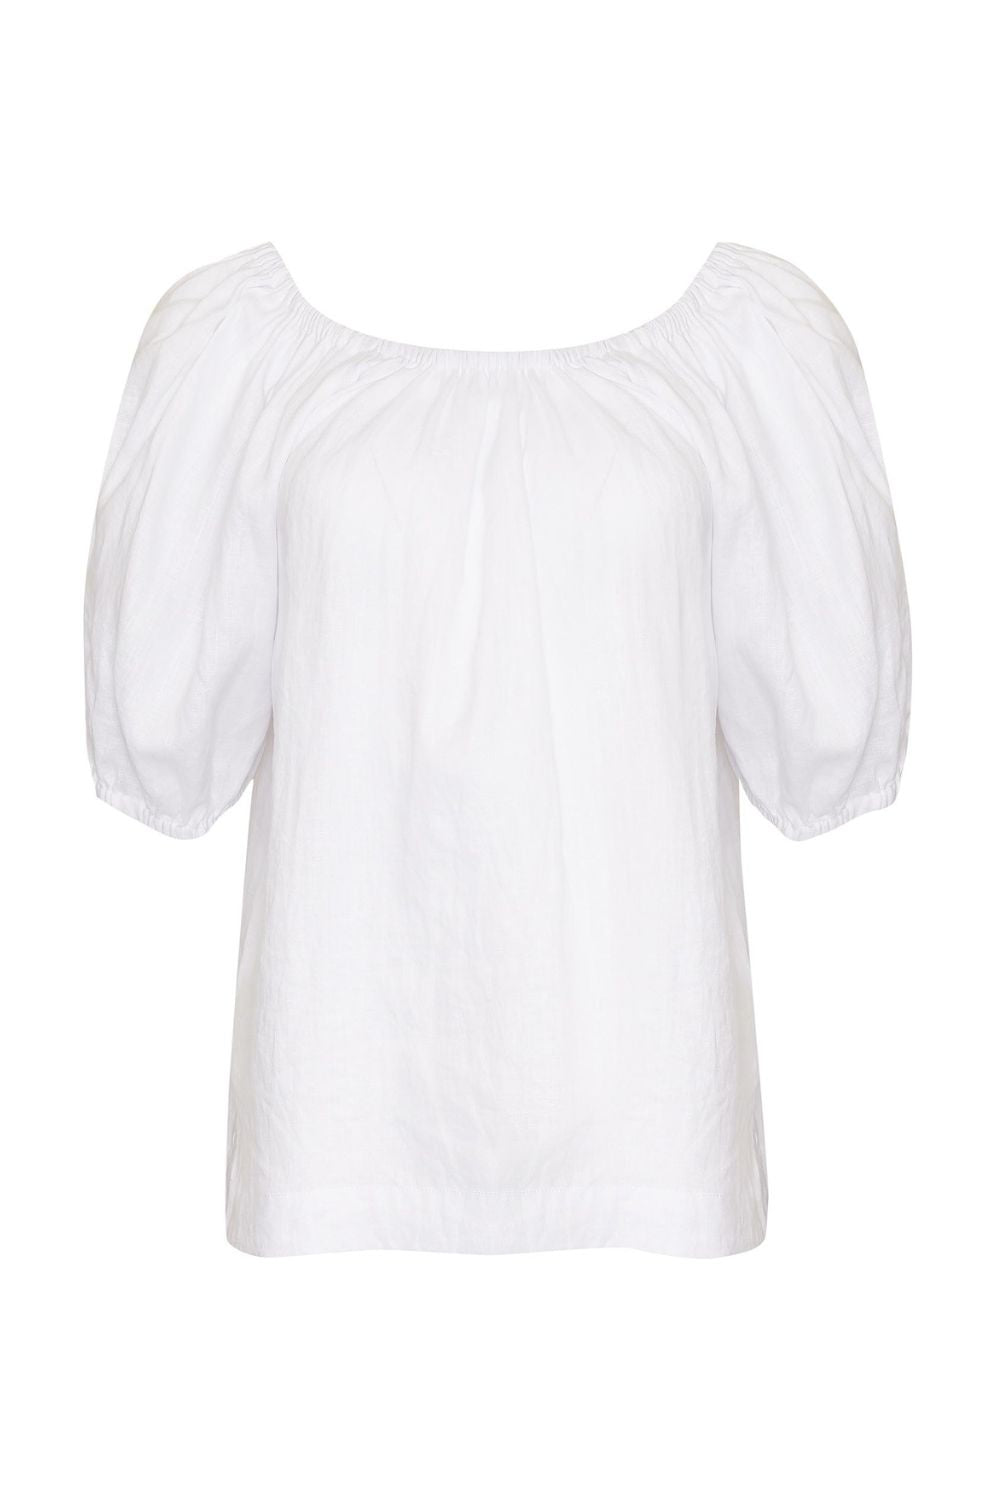 white, top, off-the-shoulder, mid-length sleeve, small side splits, elasticated sleeve cuff, tie at back, product image